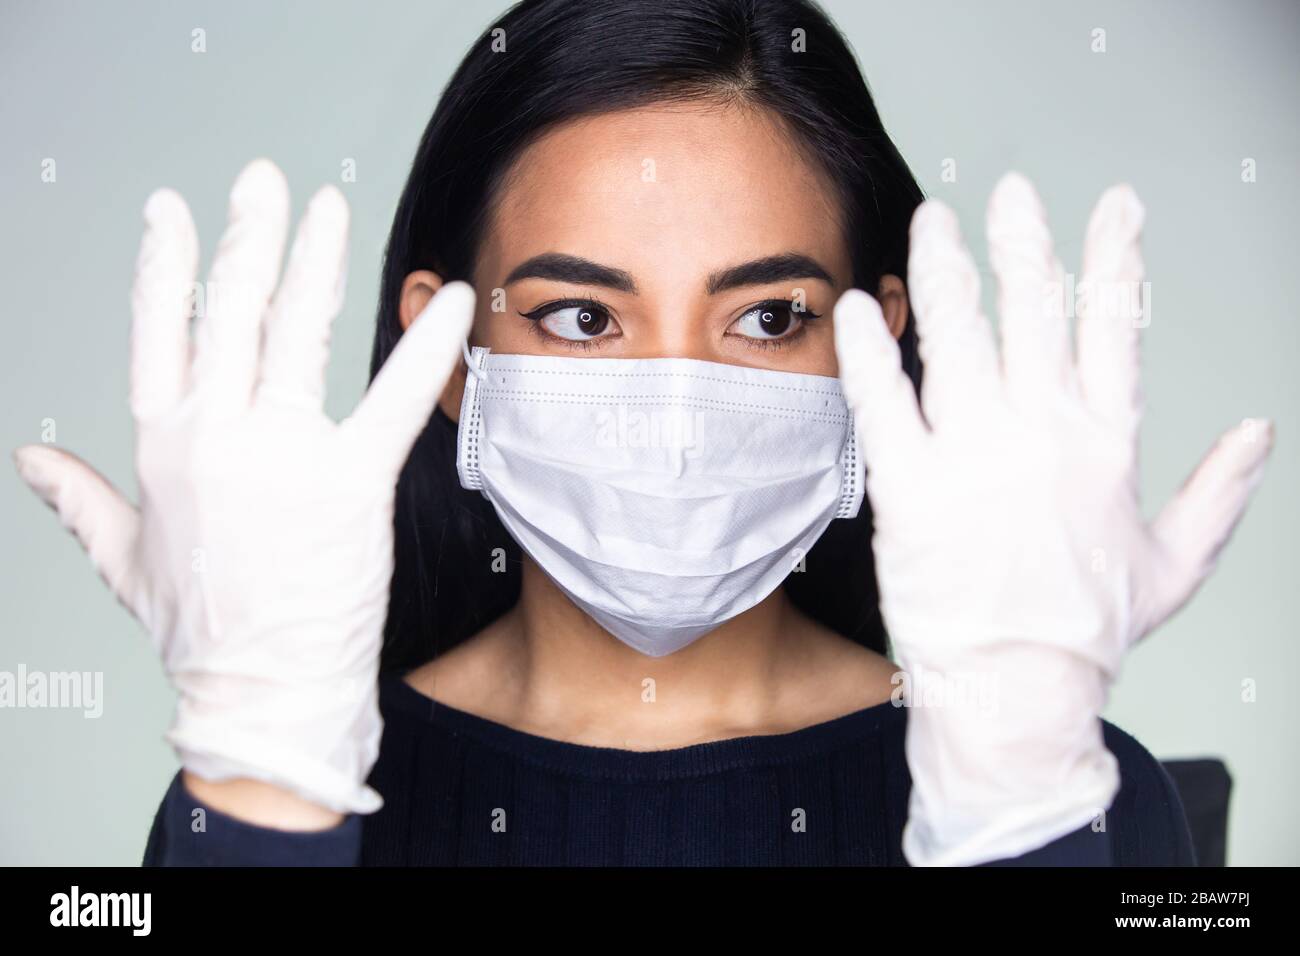 Coronavirus outbreak: An Asian woman putting on medical rubber gloves and a disposable mask to avoid contagious viruses. Stock Photo